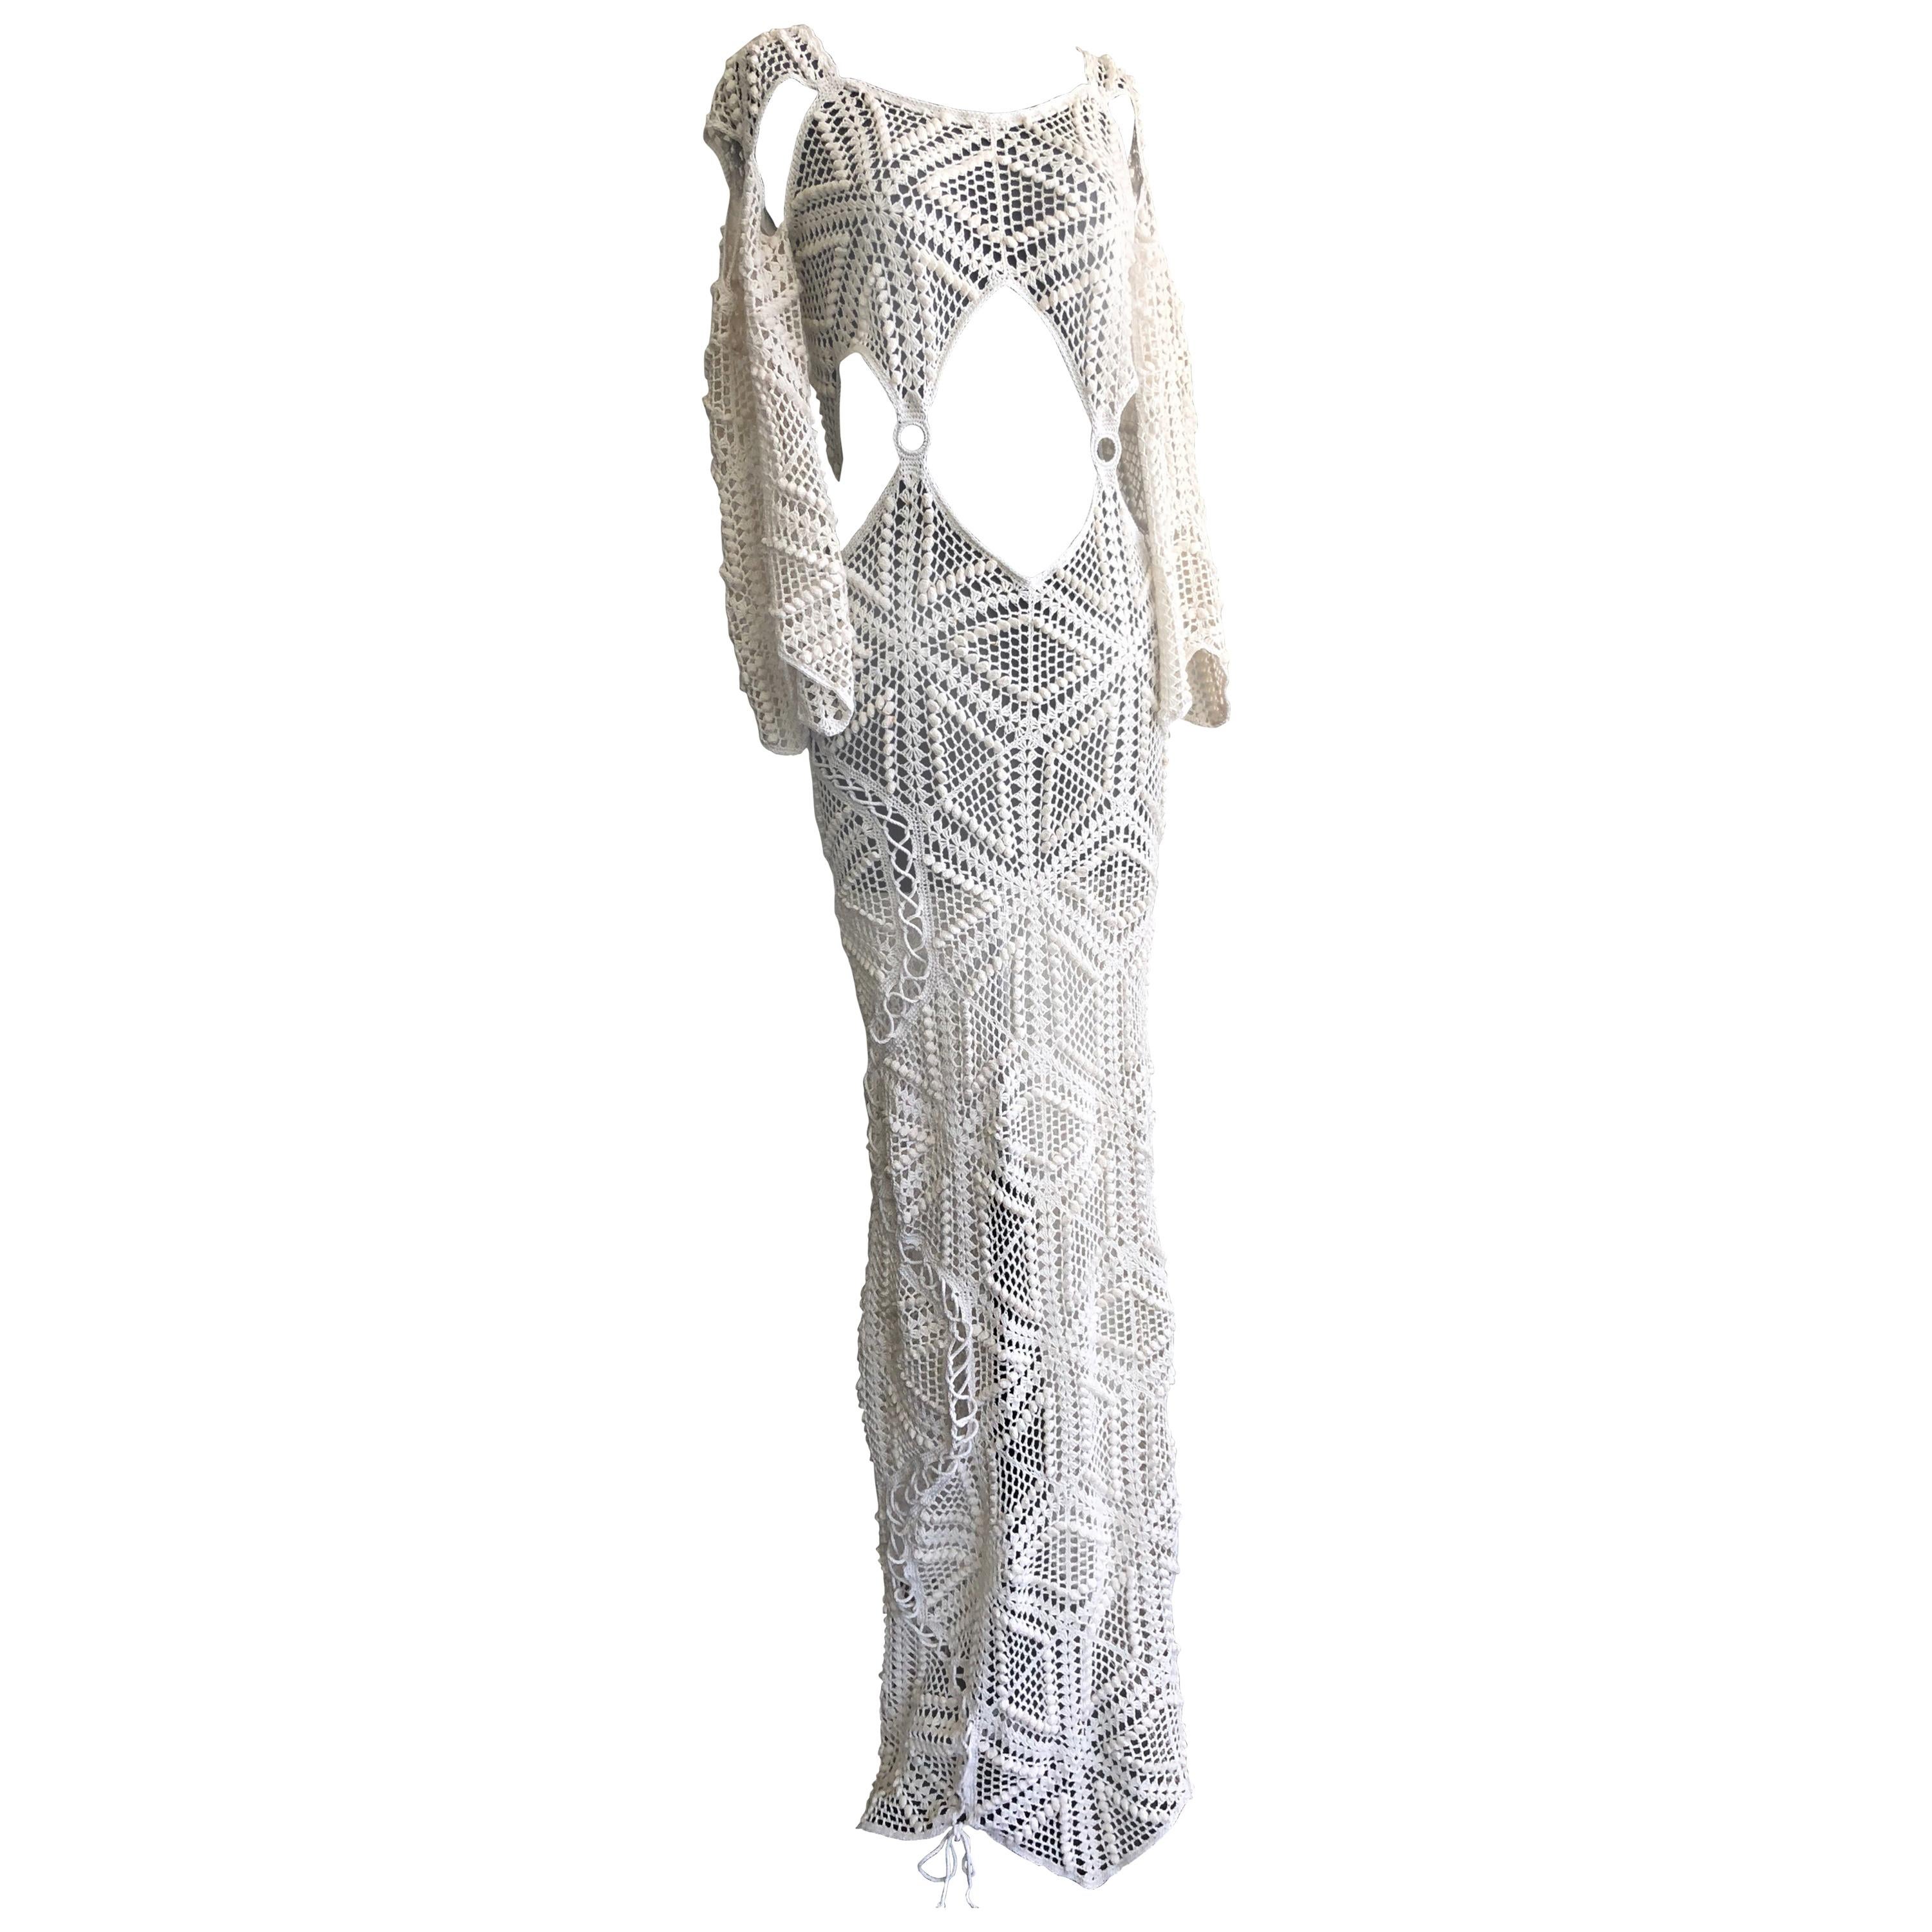 1970s Style Body Conscious Open Midriff Crochet Maxi Dress With Bell Sleeves